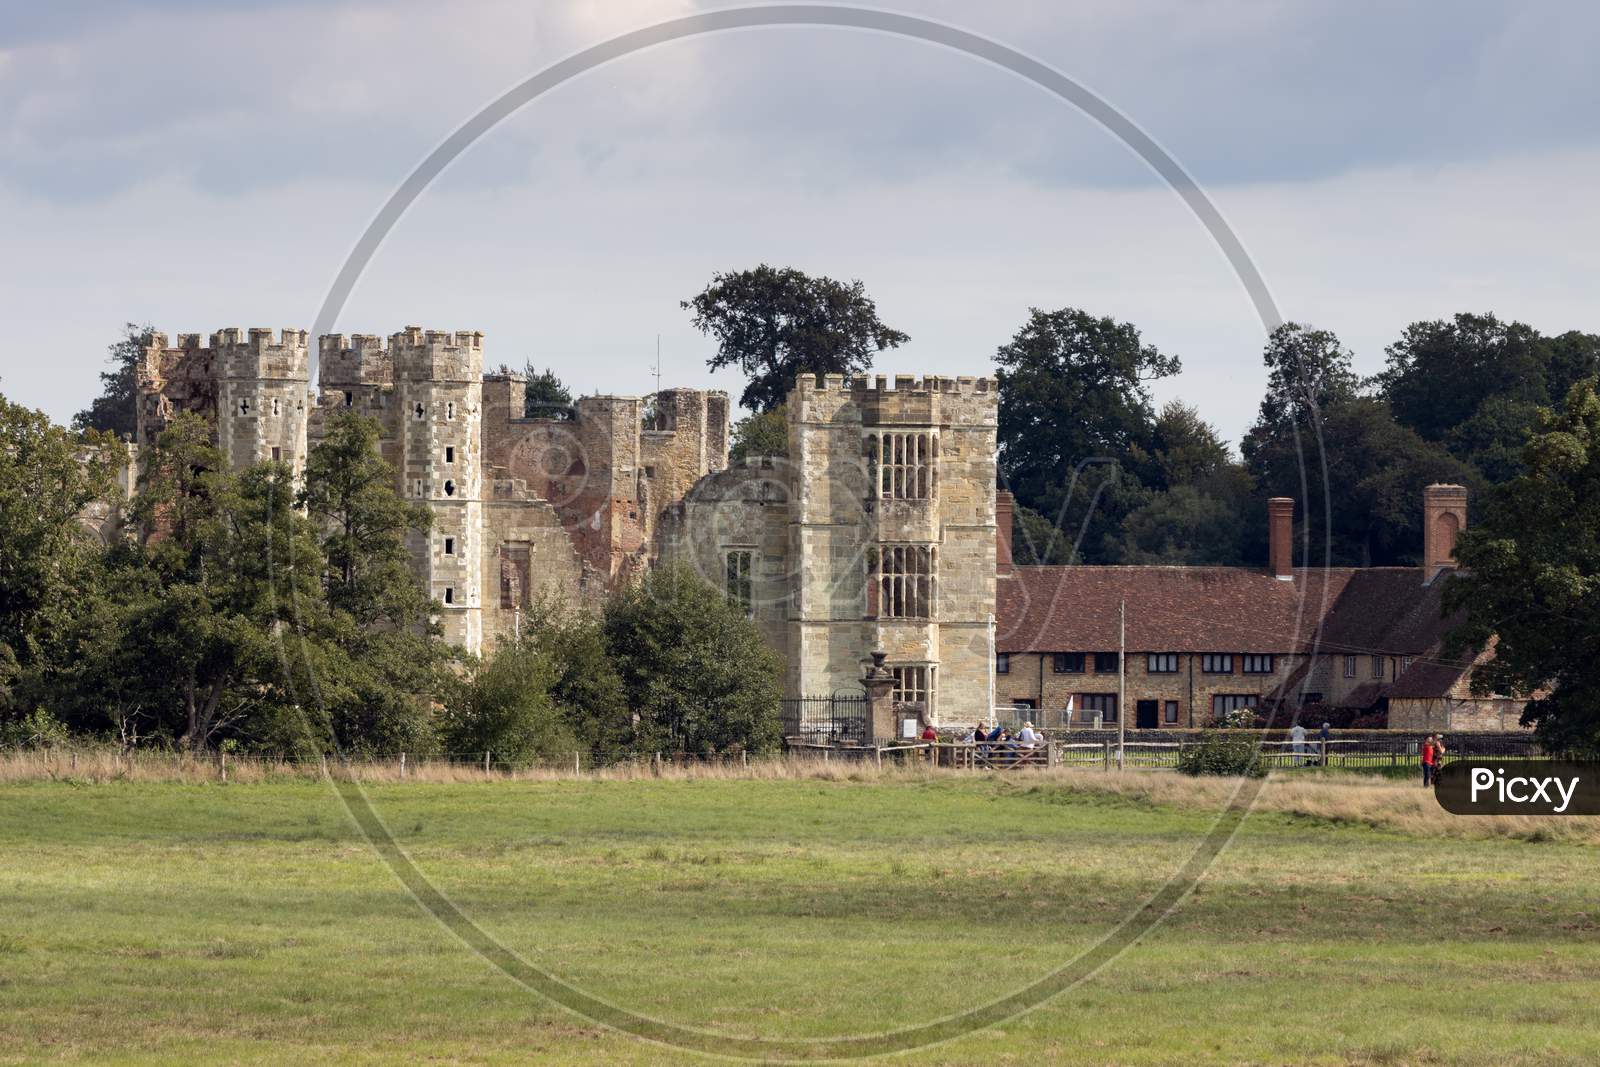 Midhurst, West Sussex/Uk - September 1 : View Of The Cowdray Castle Ruins In Midhurst, West Sussex On September 1, 2020. Unidentified People